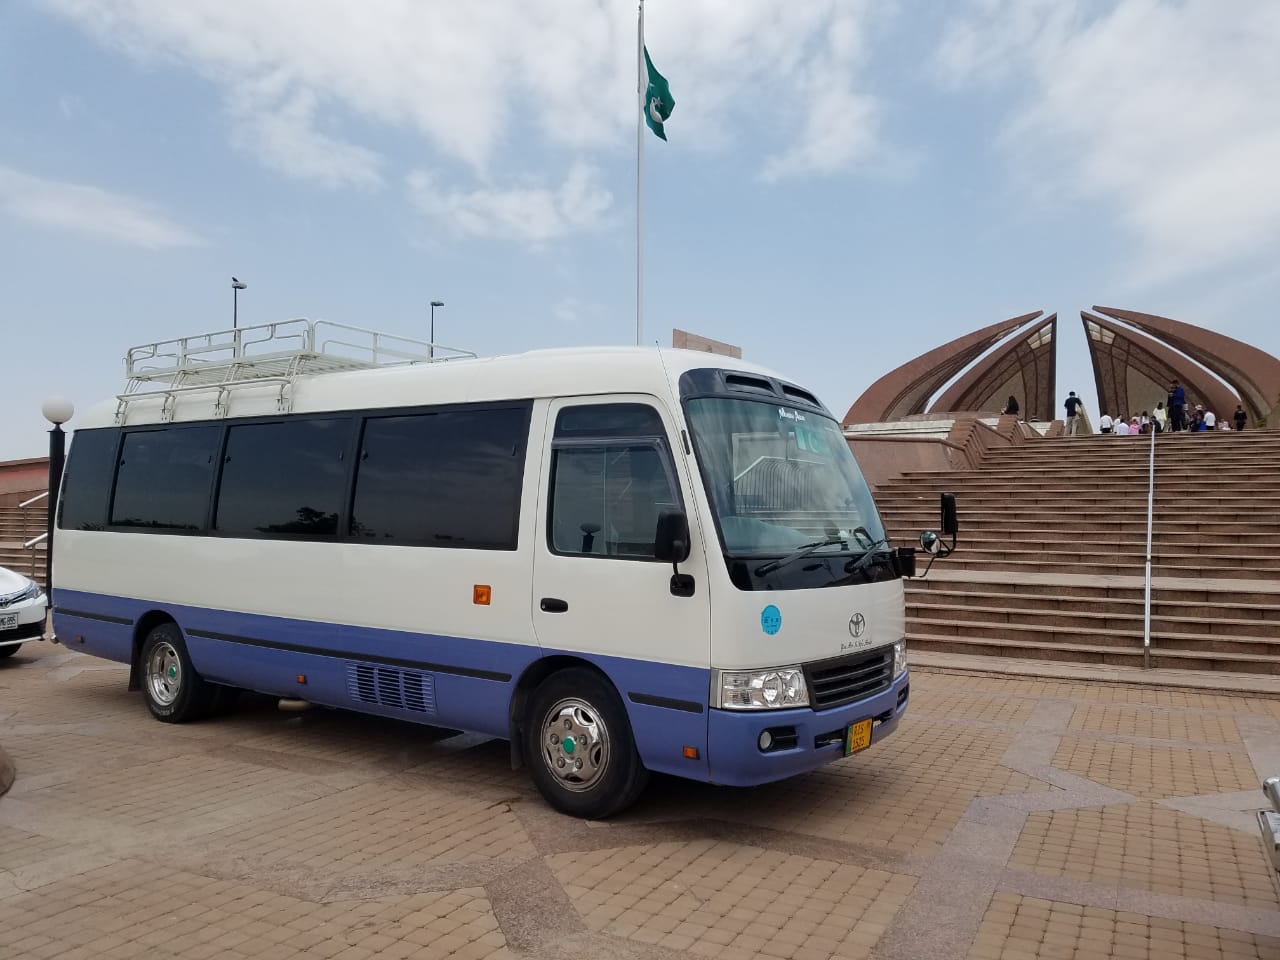 Rozefs Tourism with Tourists in Islamabad at Pakistan Monument in Toyota Coaster